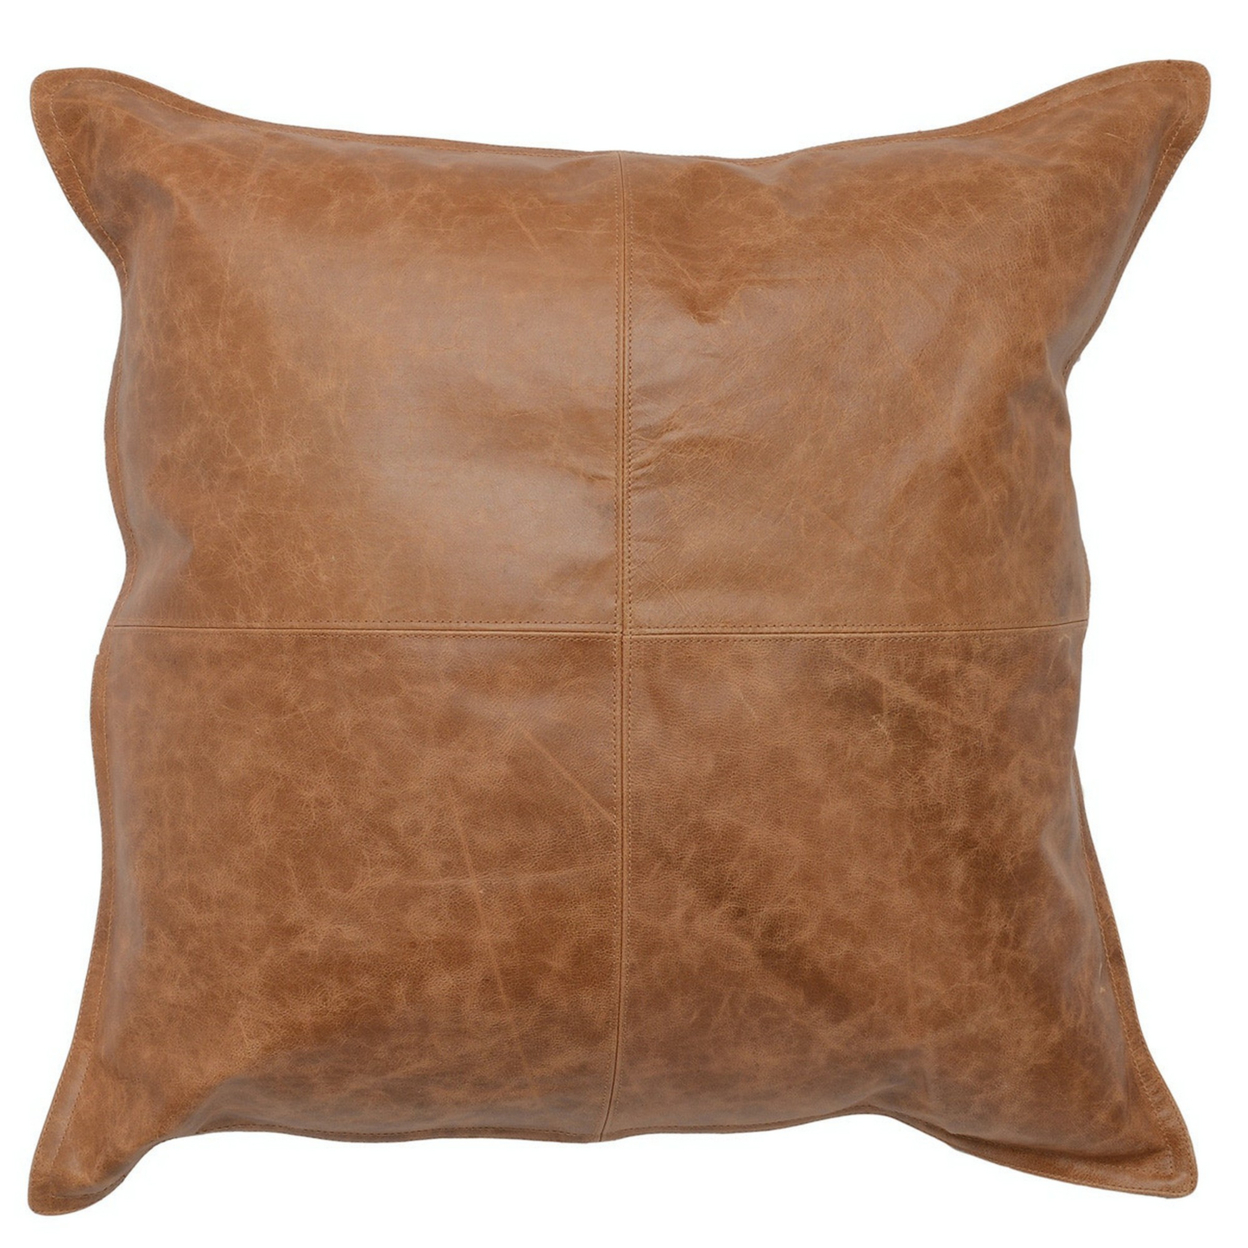 Square Leatherette Throw Pillow With Stitched Details, Brown- Saltoro Sherpi